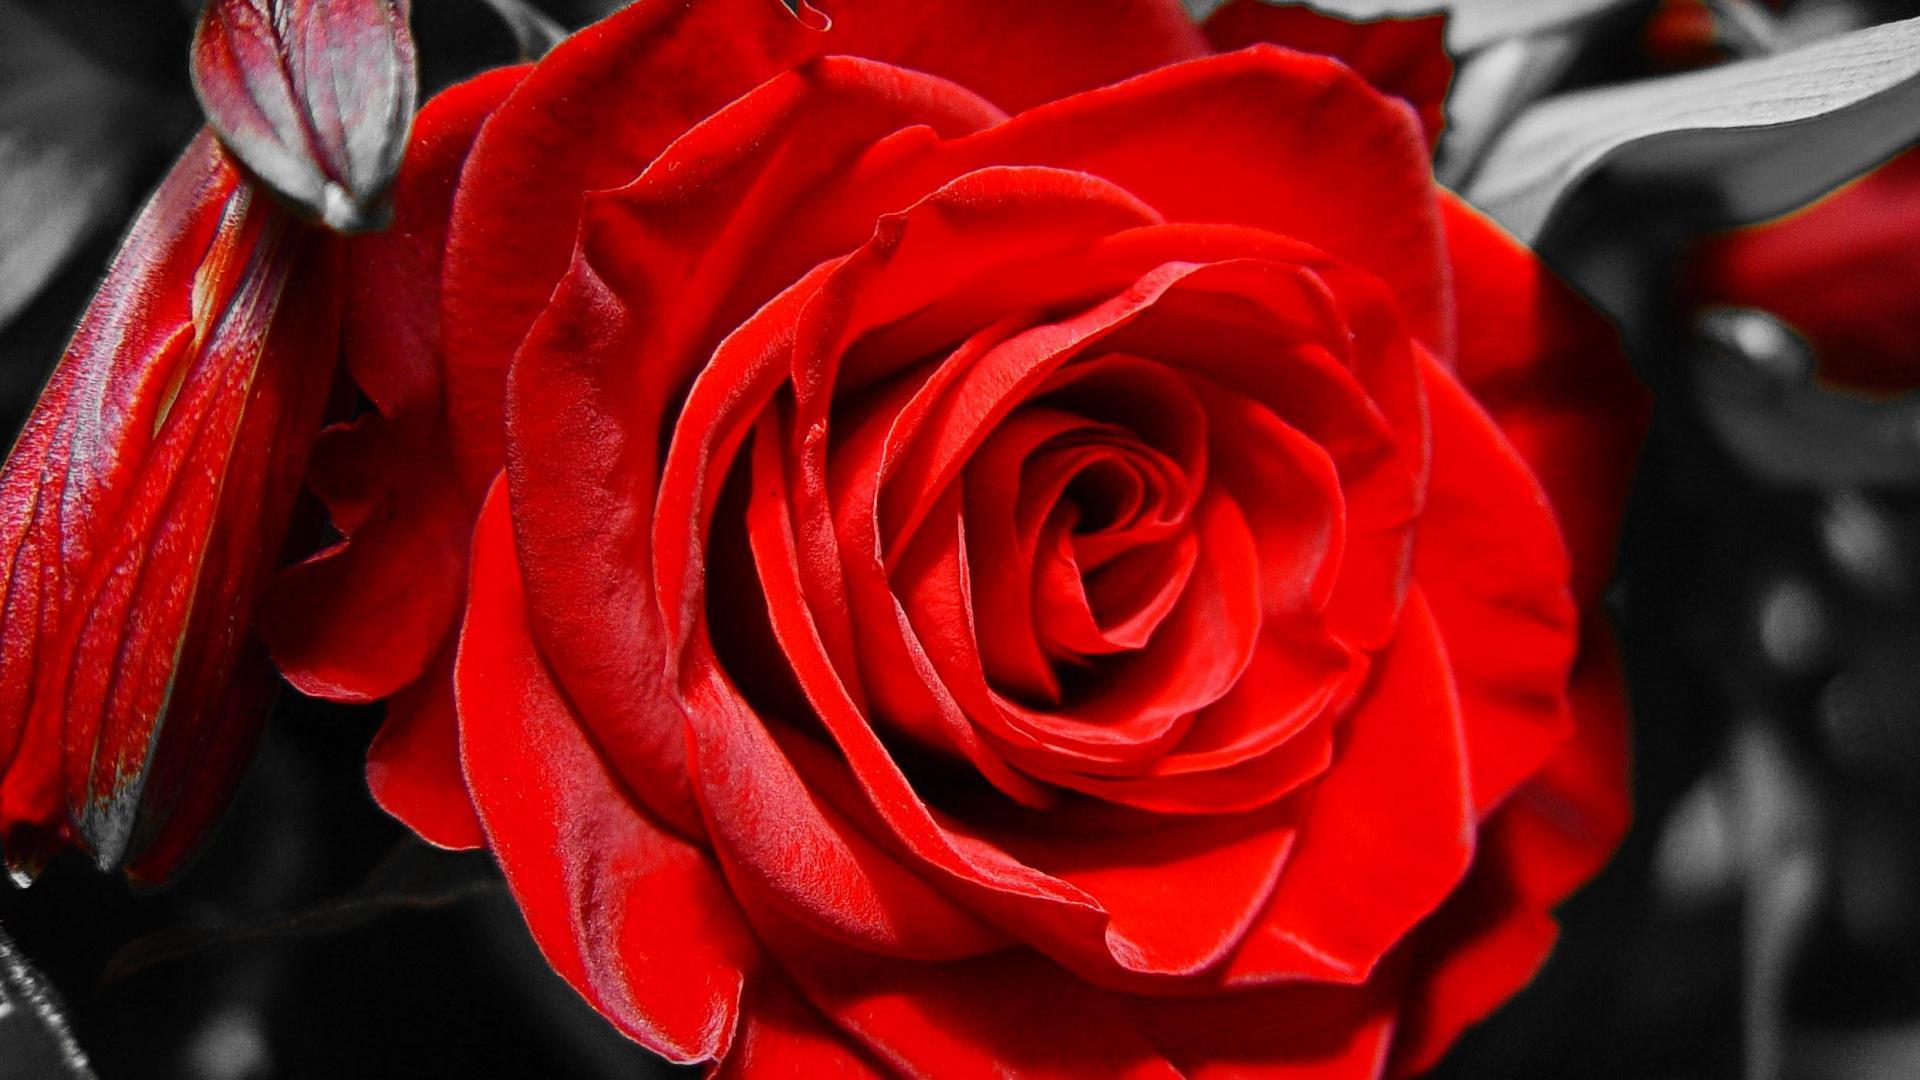 Red rose on black and white background on March 8 wallpaper